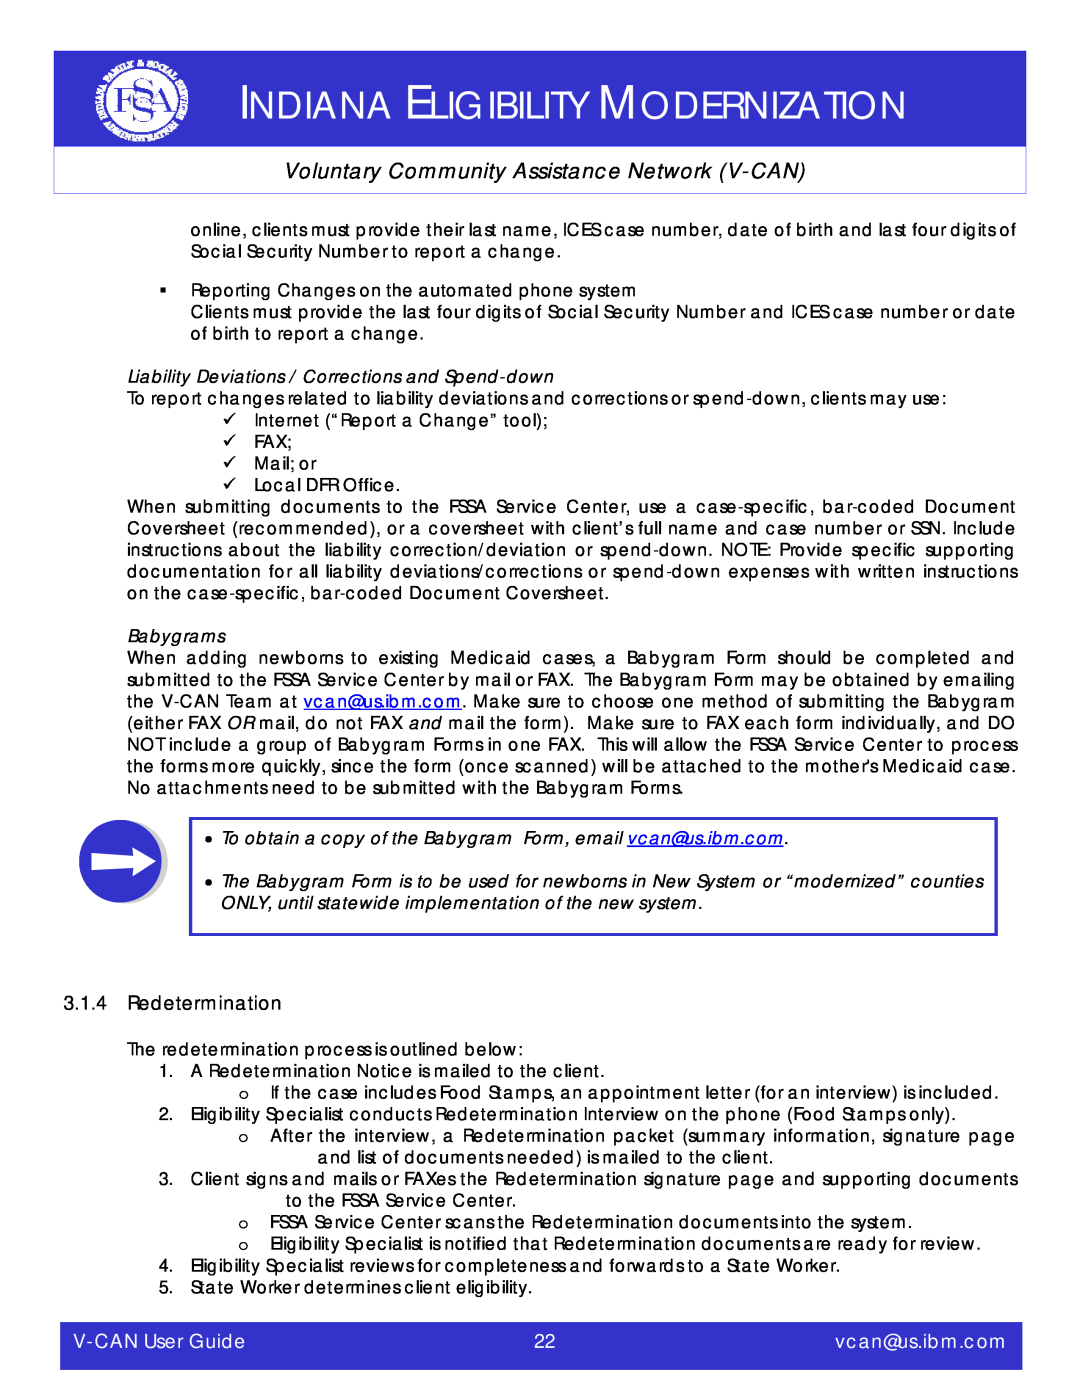 IBM Redetermination, Indiana Eligibility Modernization, Voluntary Community Assistance Network V-CAN, V-CAN User Guide 